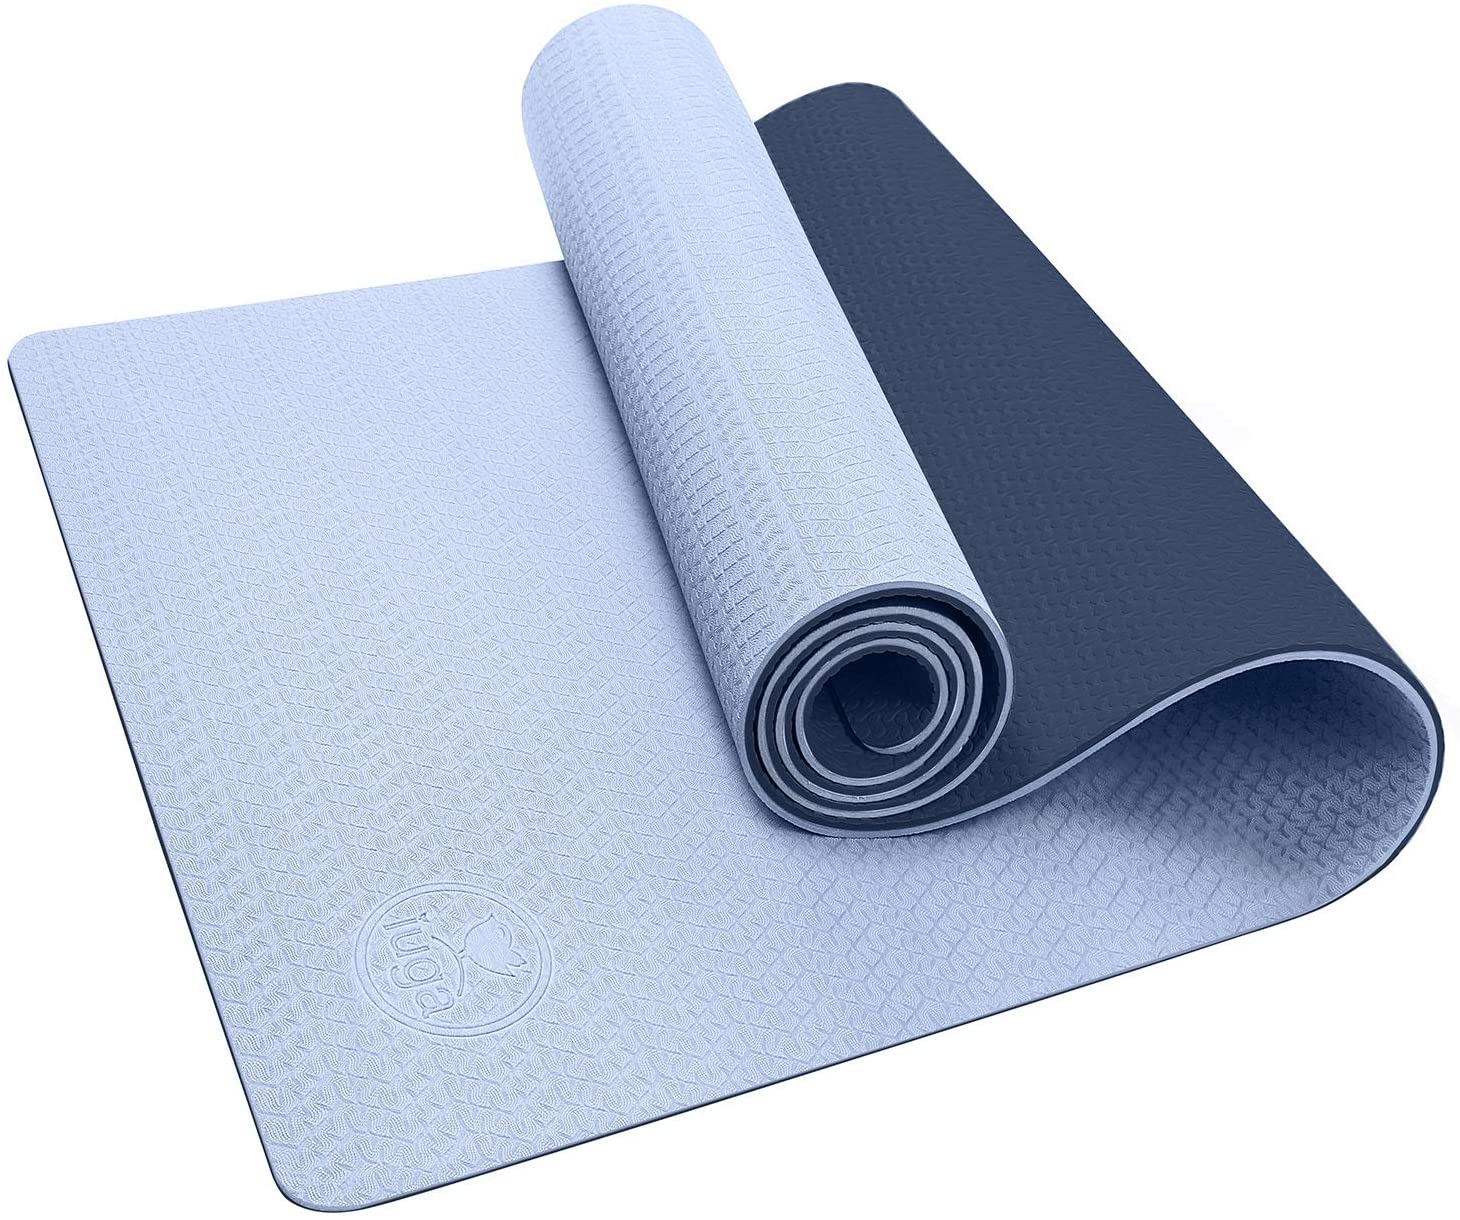 15 Best Yoga Mats Of 2023 Reviewed, 53% OFF